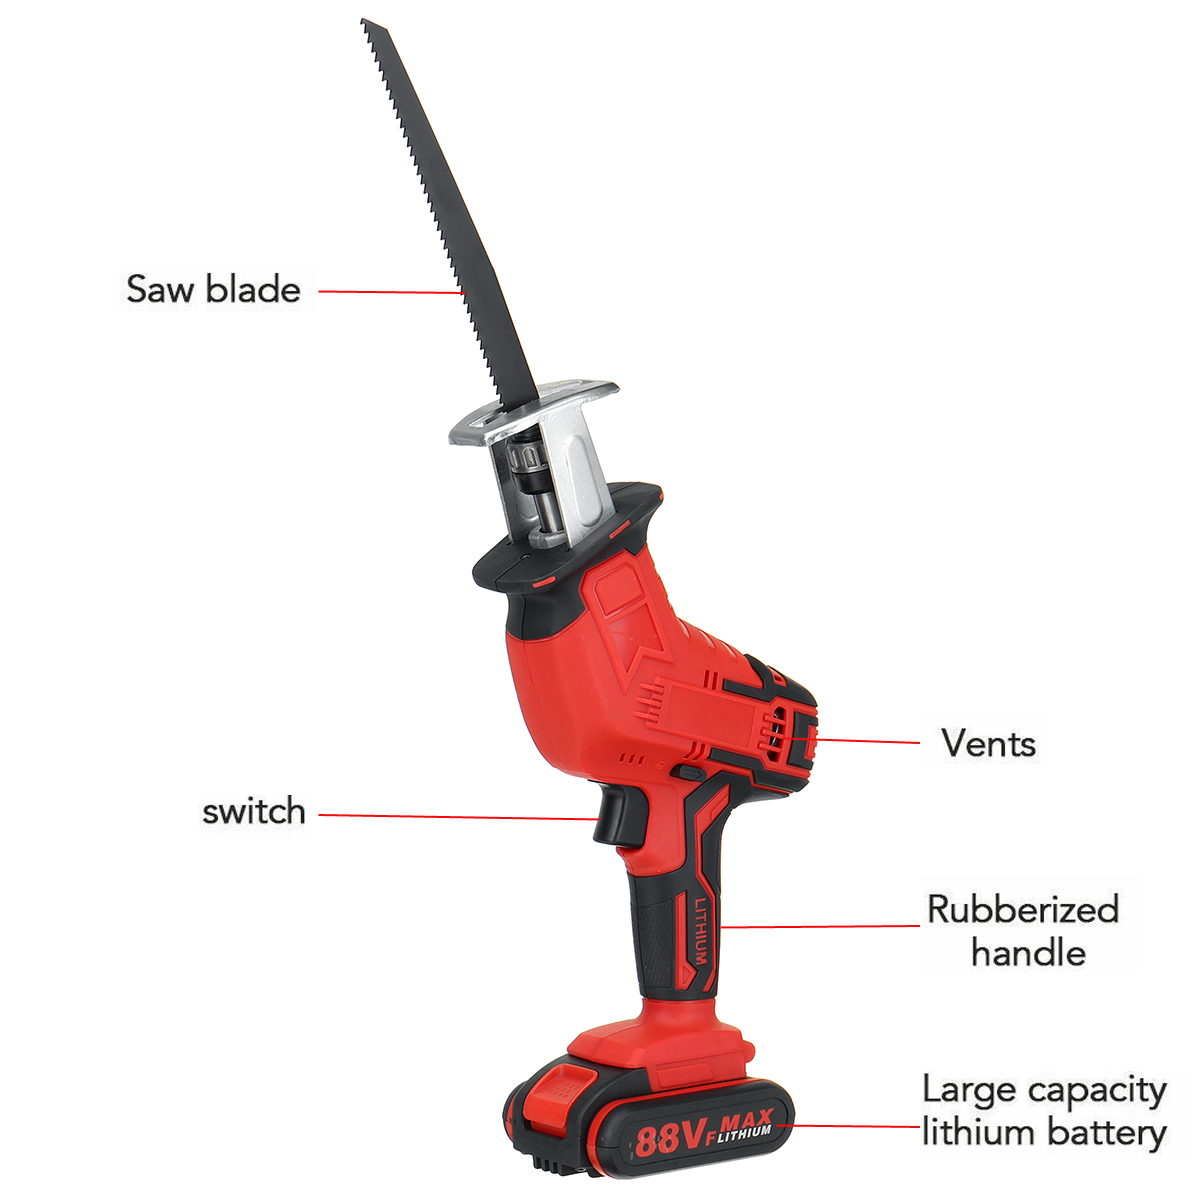 88VF-Electric-Reciprocating-Saws-Outdoor-Woodworking-Cordless-Portable-Wood-Cutting-Saw-1718639-5